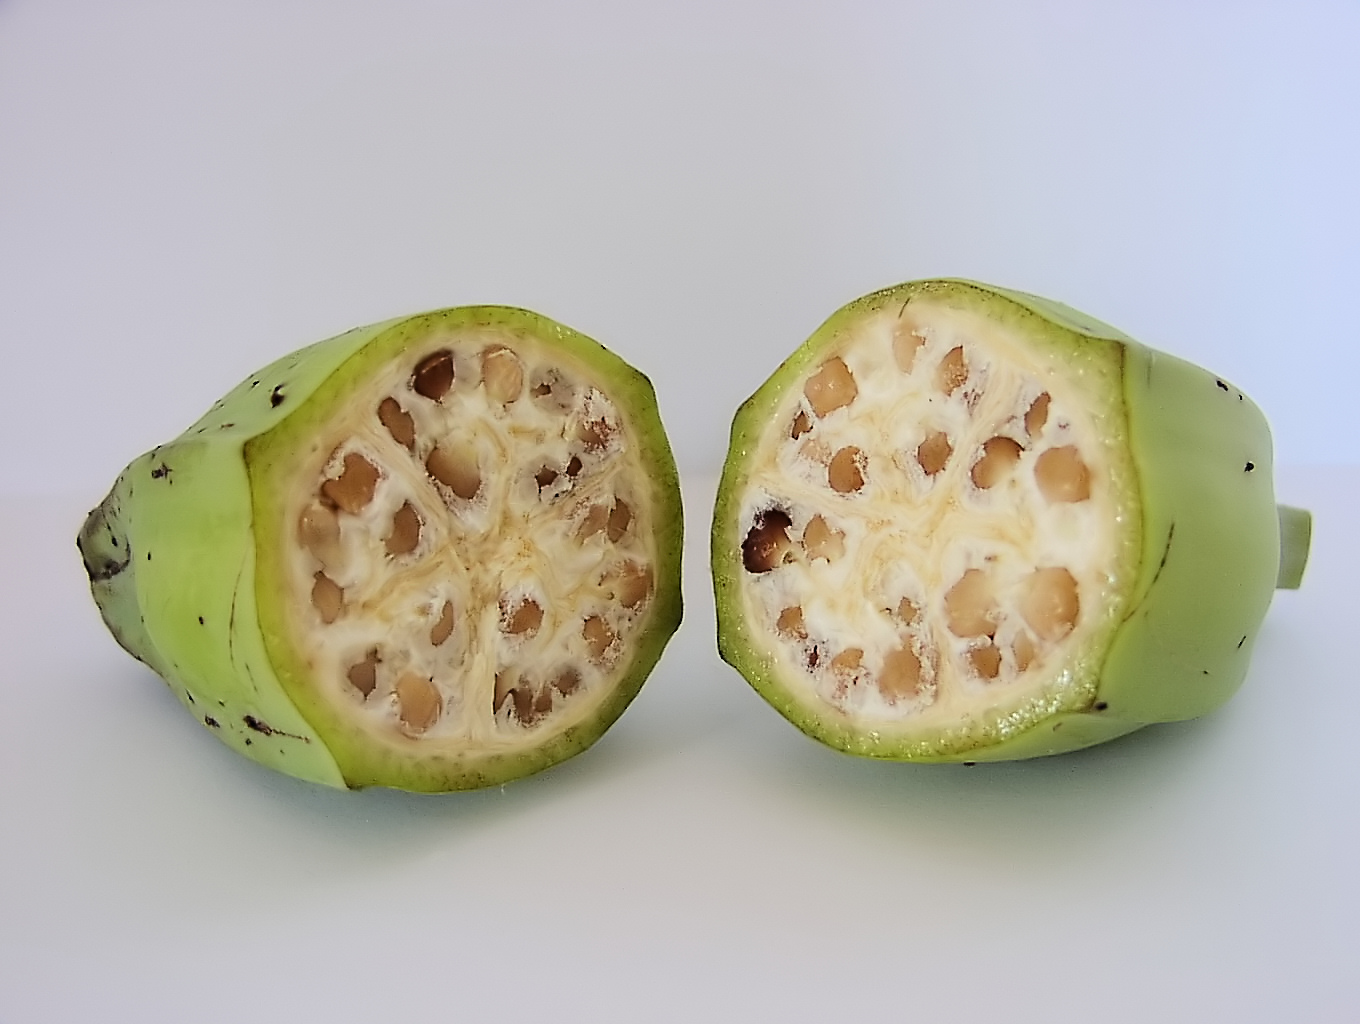 fruits with many seeds